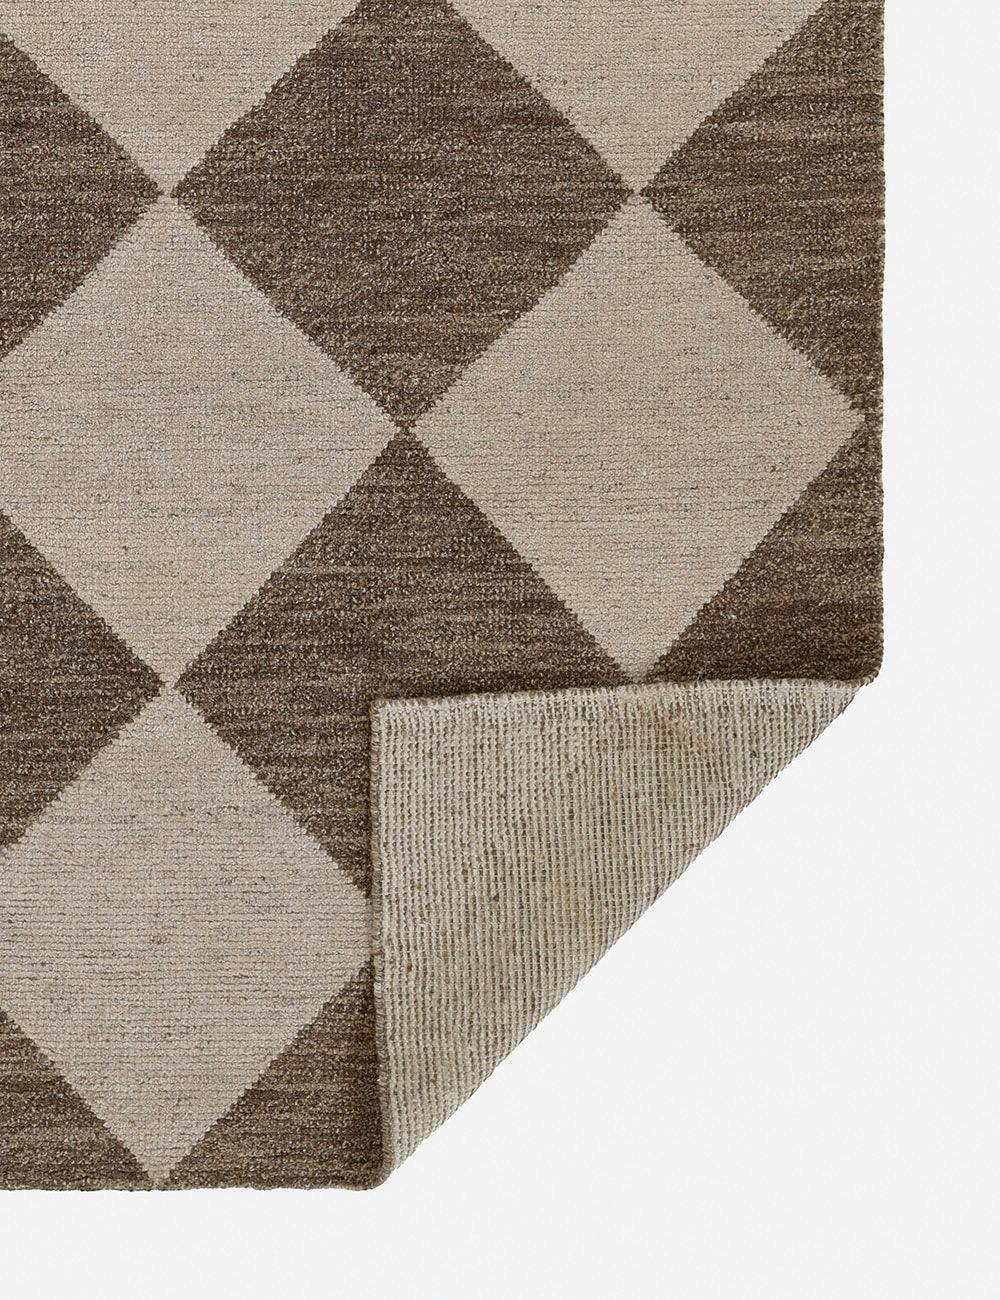 Palau Diamond-Checked Hand-Knotted Wool Rug in Brown, 10' x 14'